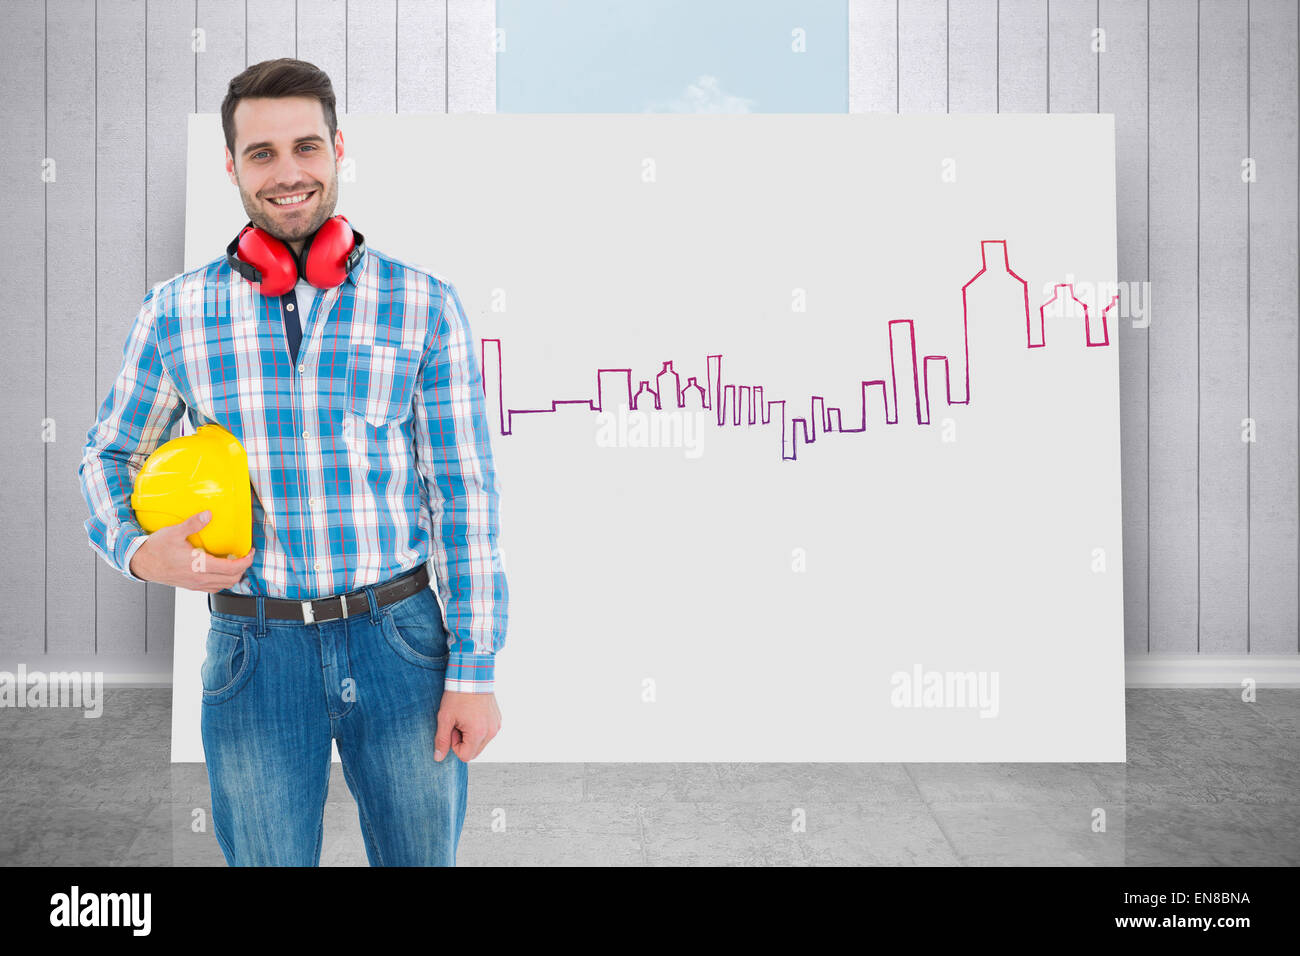 Composite image of confident manual worker with hardhat and ear muffs Stock Photo